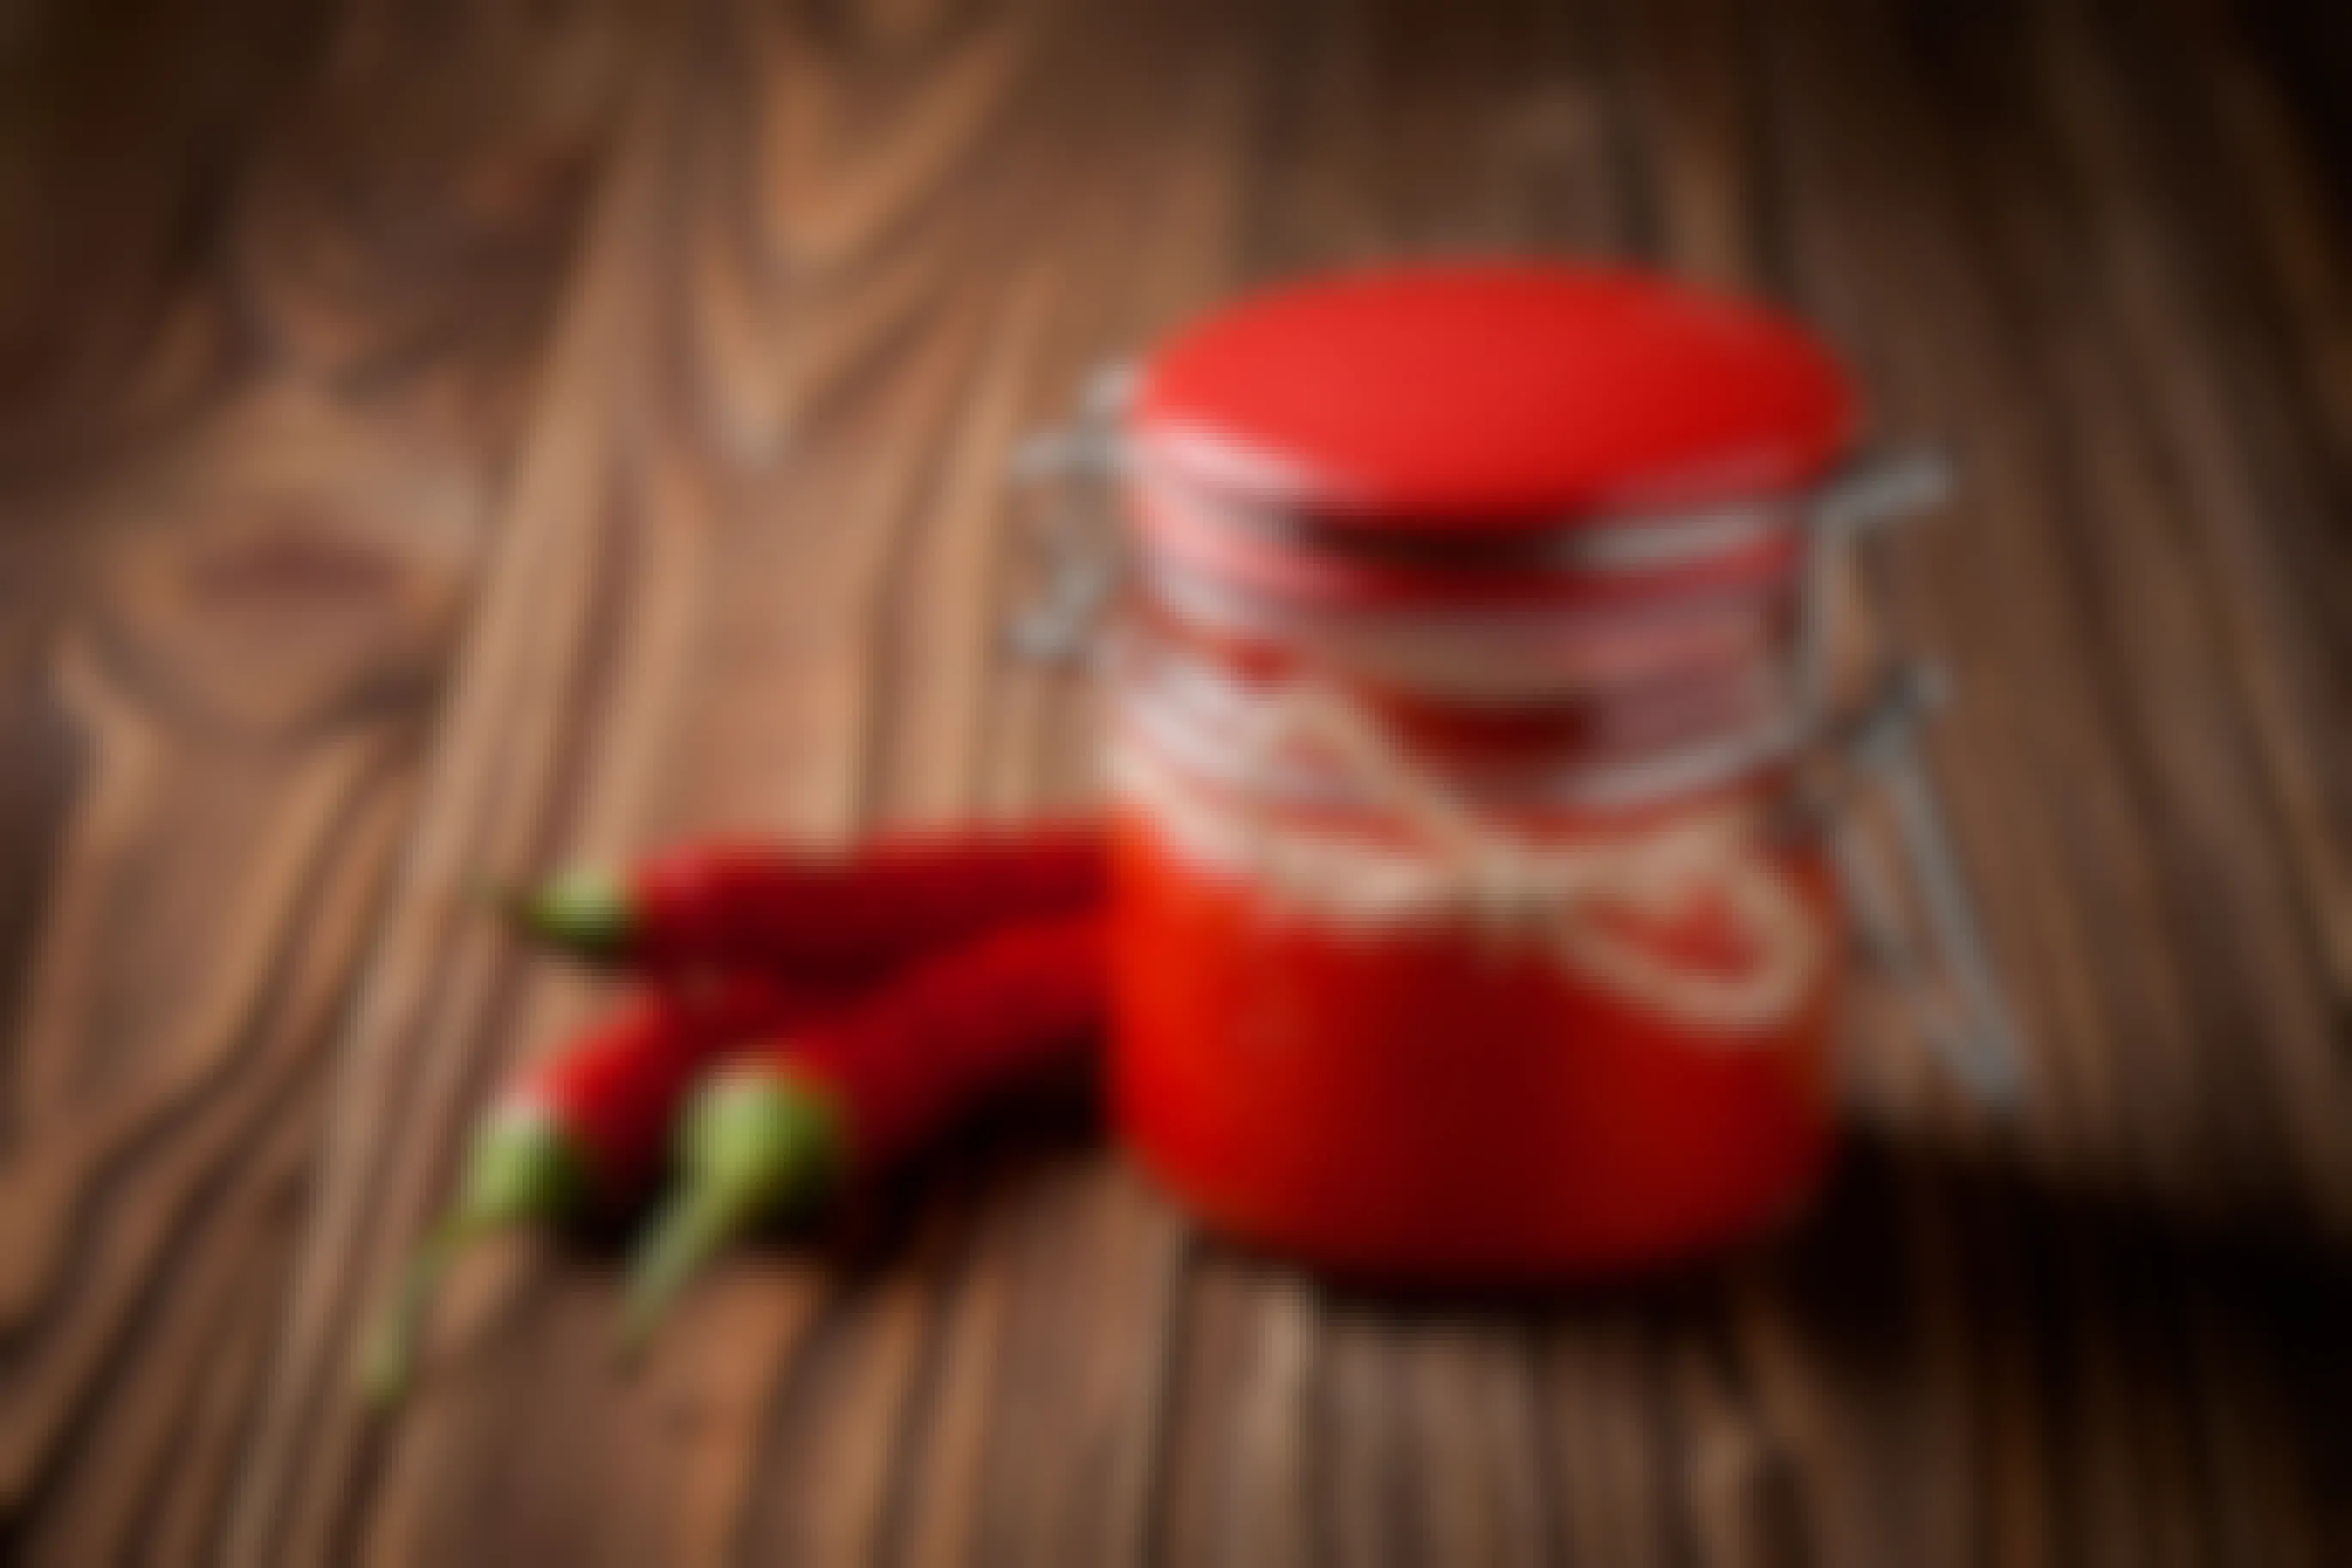 Jar of homemade sriracha sauce with chili peppers on a wooden table.